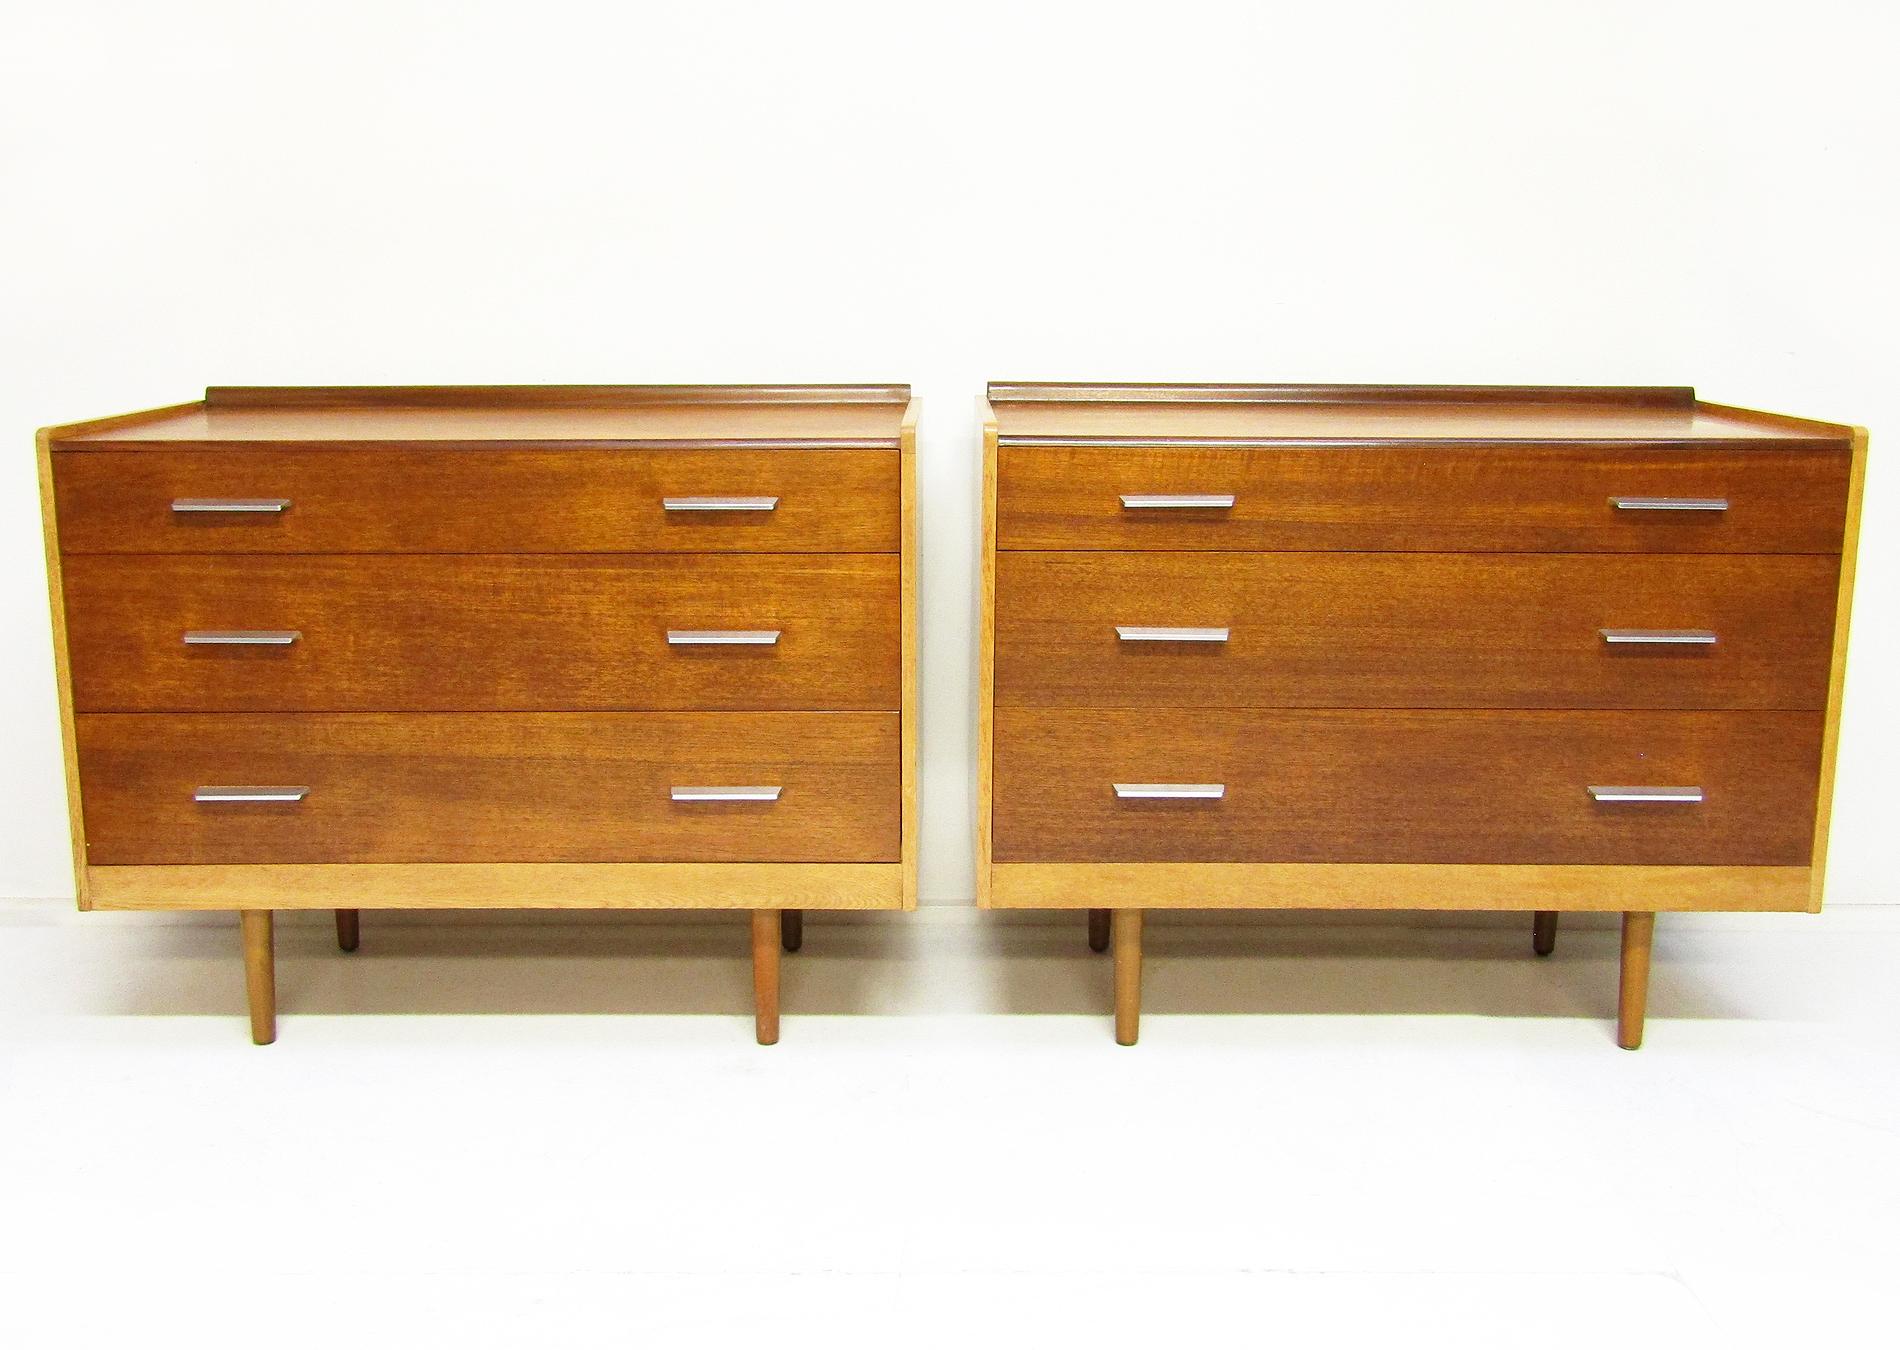 A rare pair of 1960s chests of drawers in teak, oak and steel by John & Sylvia Reid for Stag.

Similar to Hans Wegner designs, they contrast rich teak with oak wood. The metal handles add a sense of architectural minimalism.

They have been